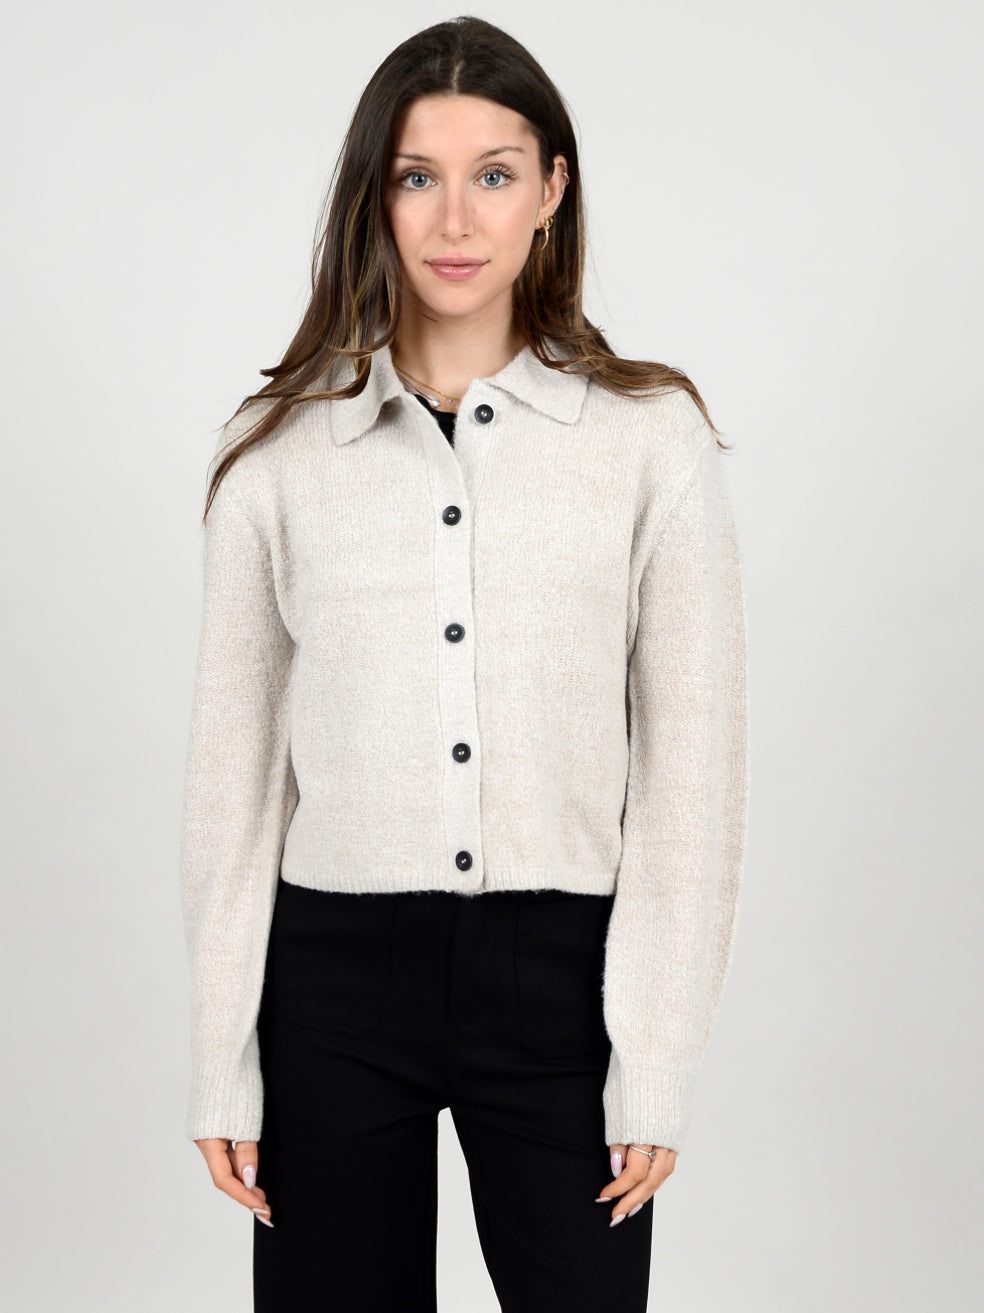 RD Style Collette Collar Cardigan